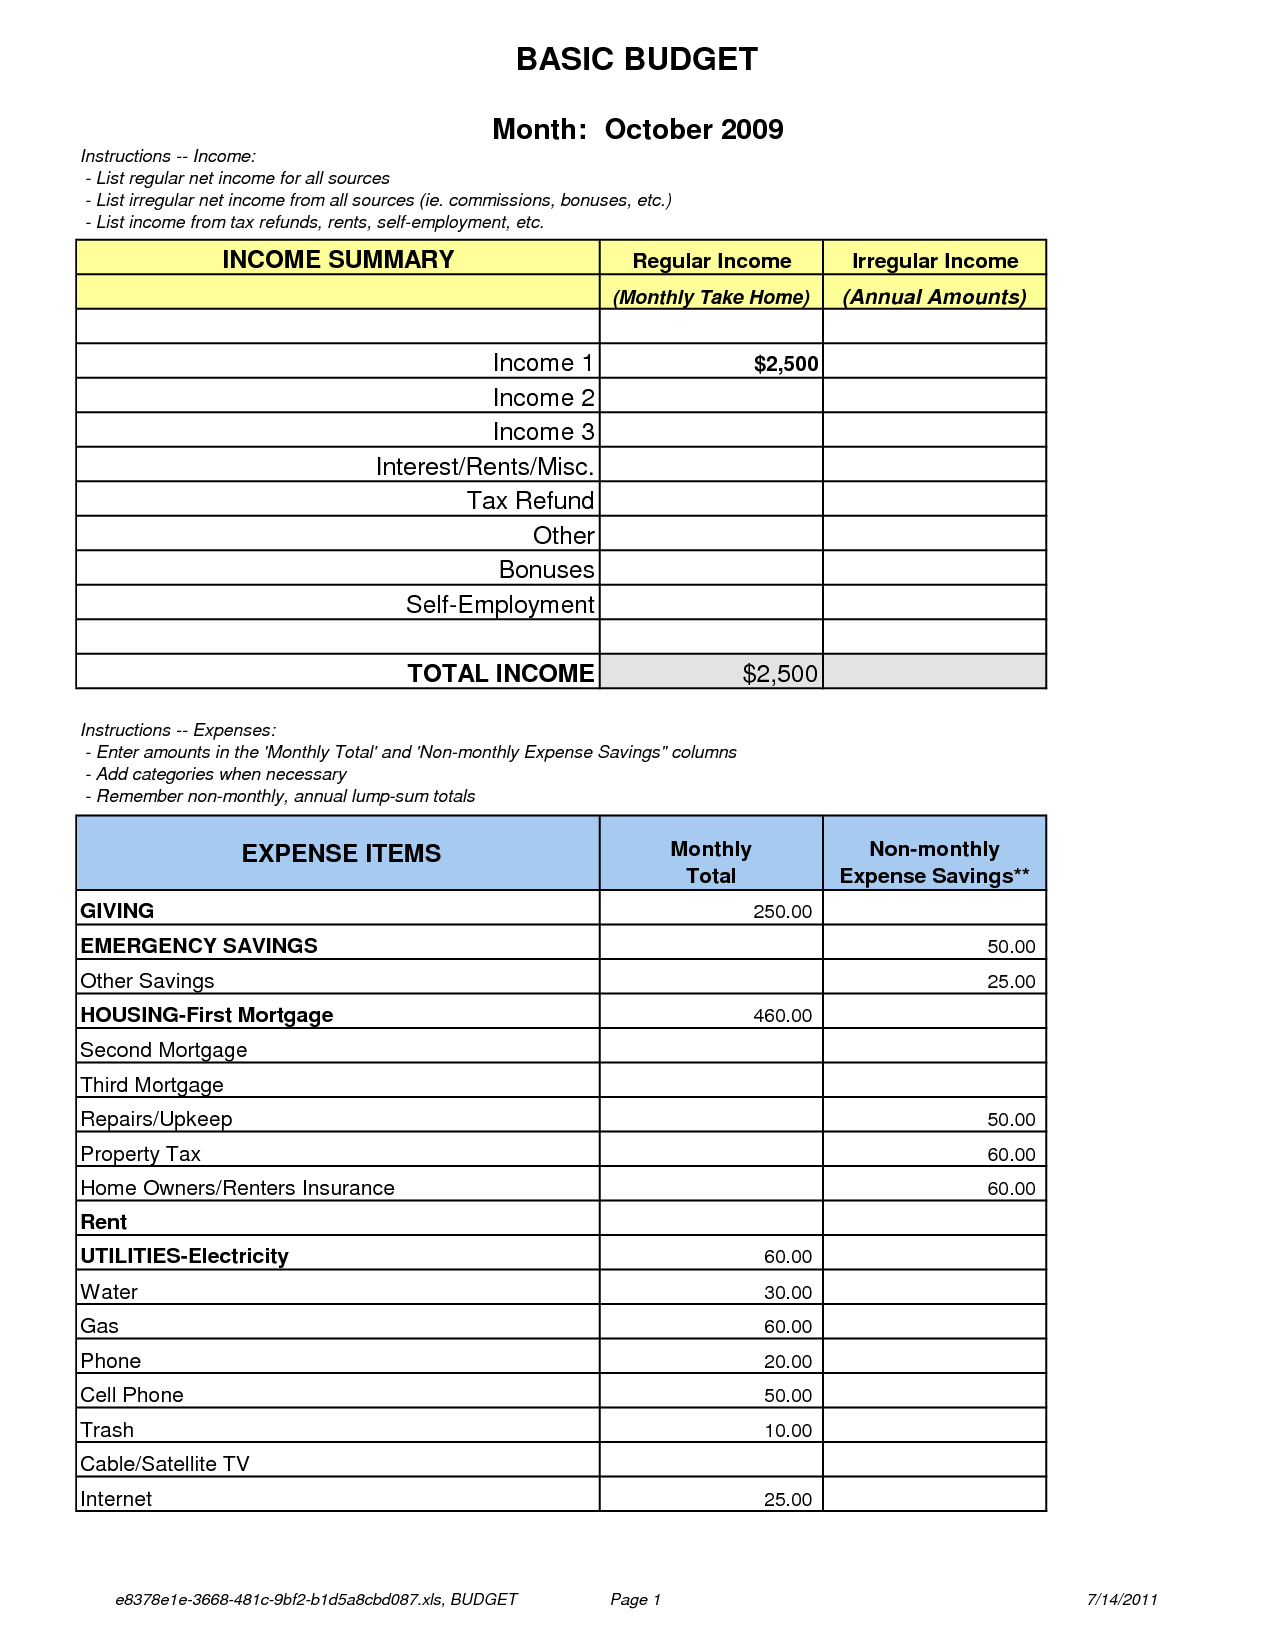 5-best-images-of-dave-ramsey-printable-budget-form-free-printable